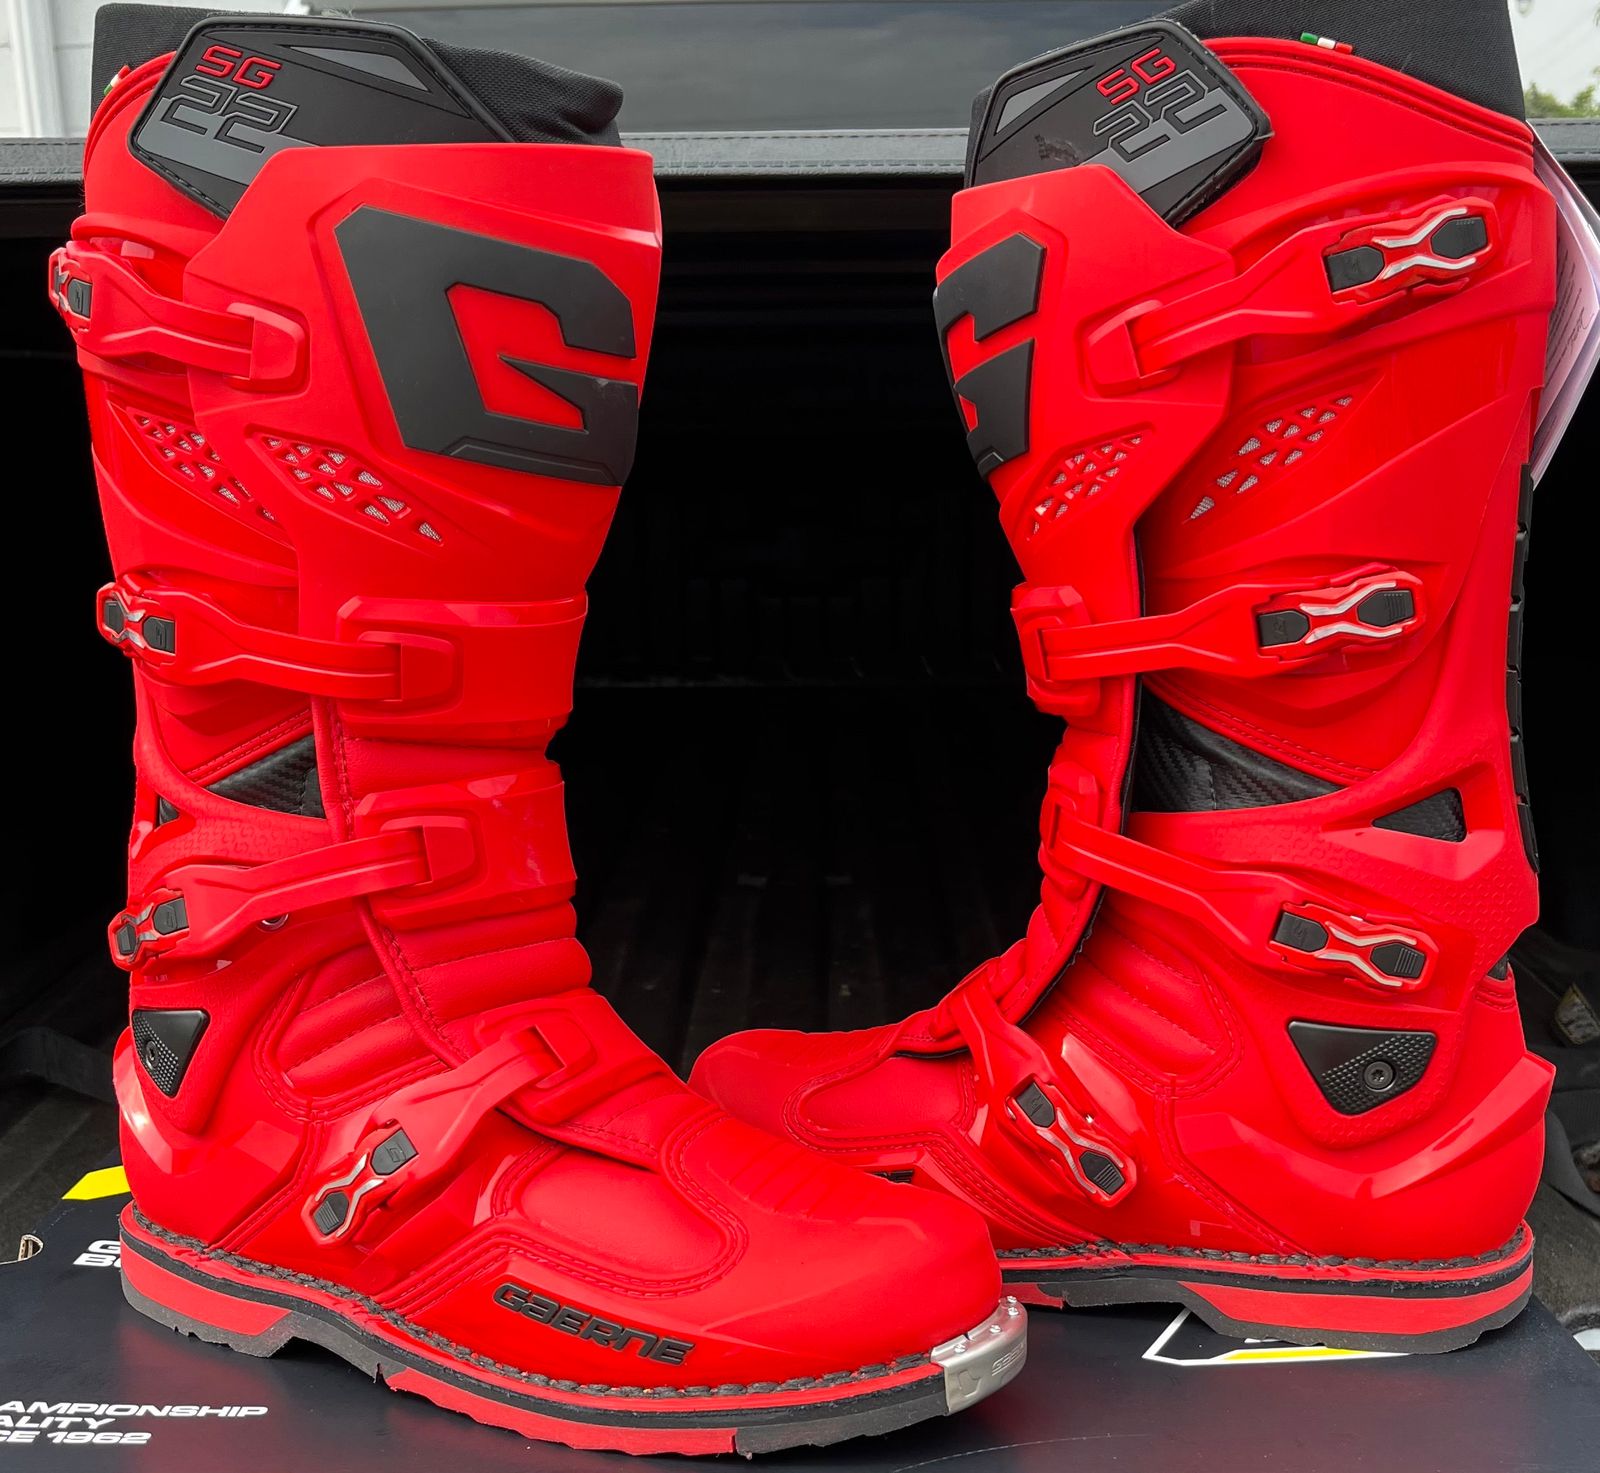 NEW! Gaerne SG-22 Boots - Red